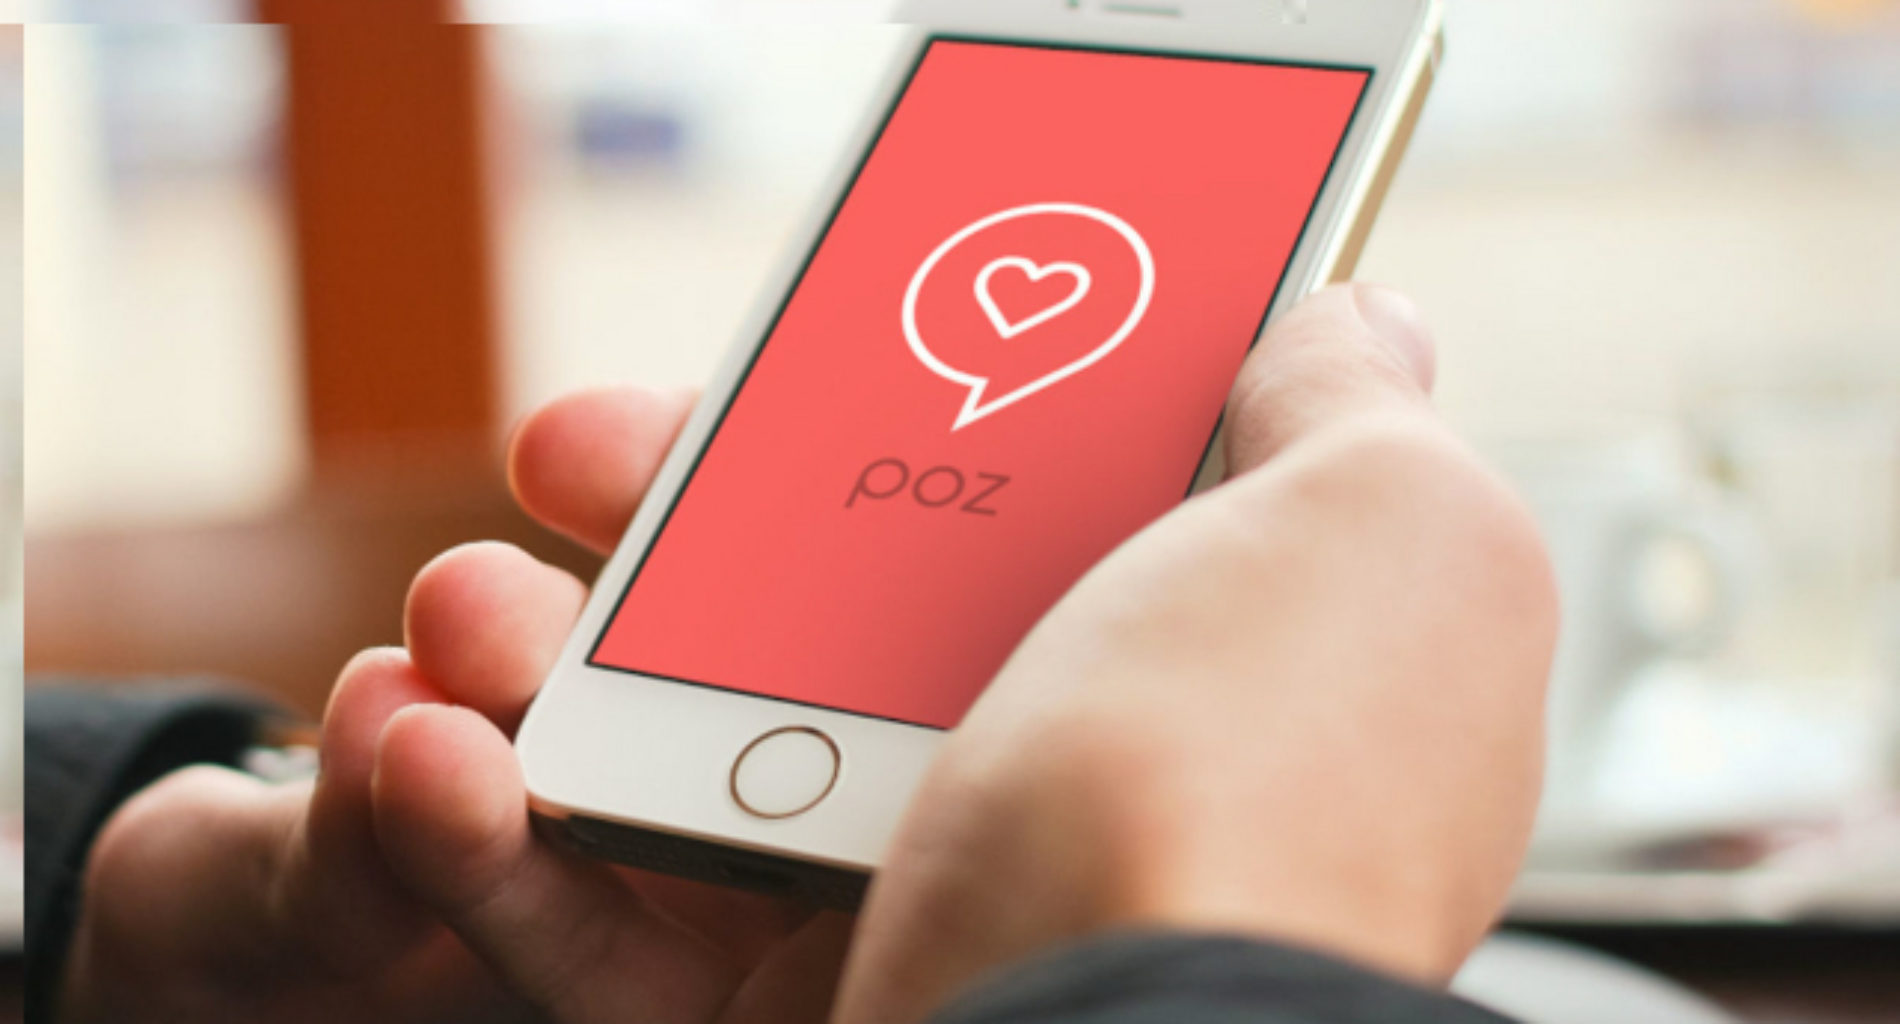 New Dating App Wants To Help HIV Positive People Find Love